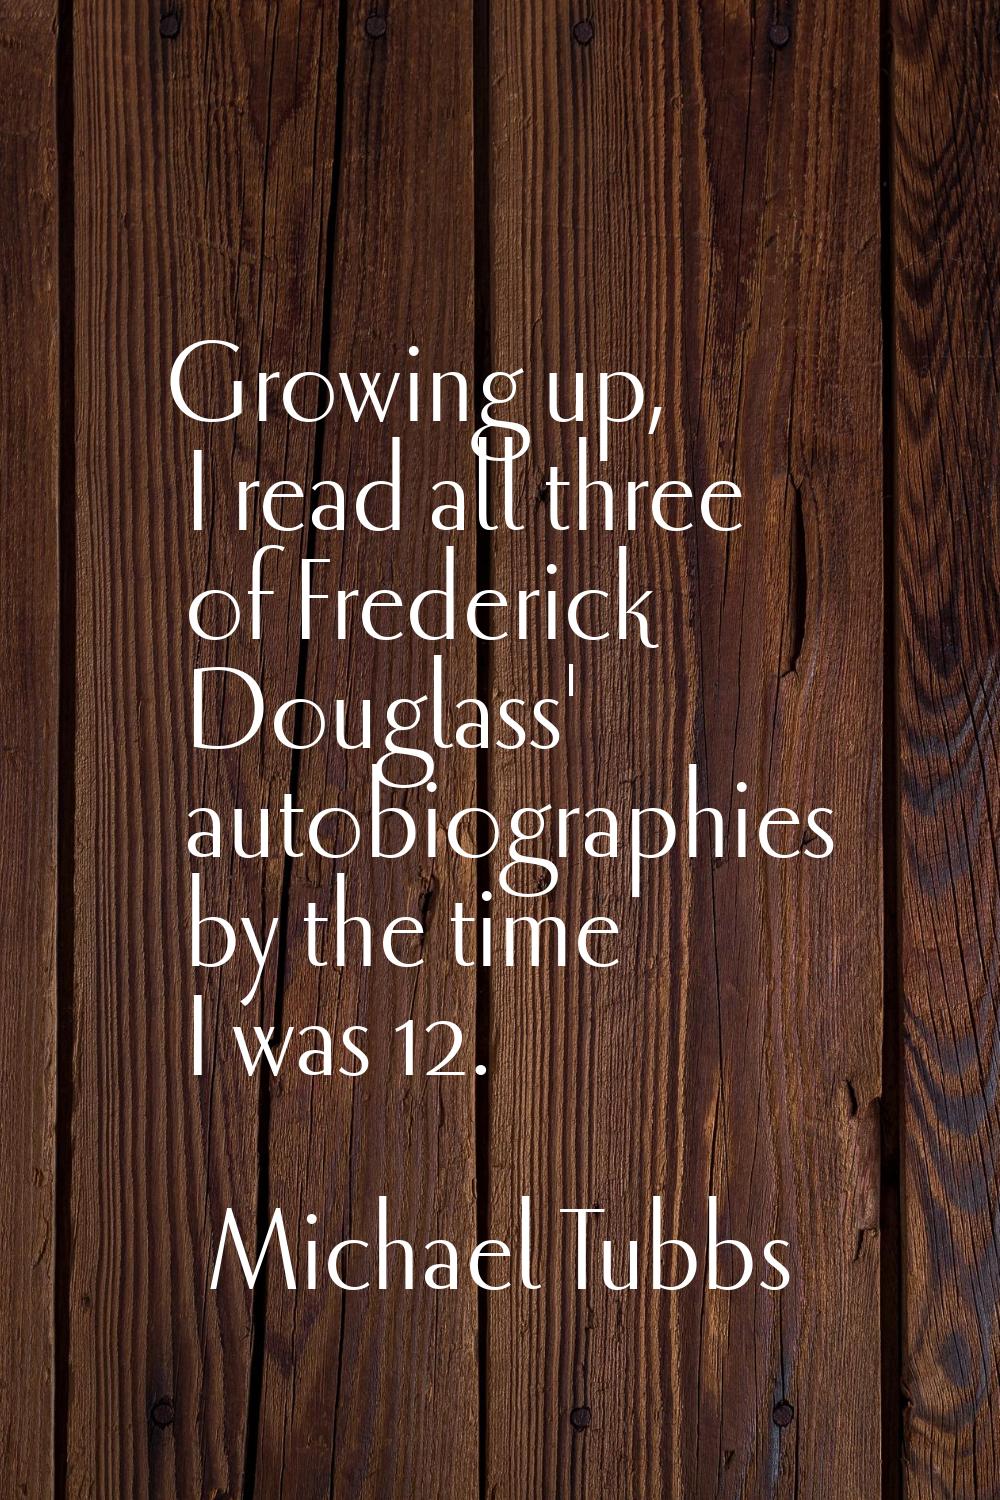 Growing up, I read all three of Frederick Douglass' autobiographies by the time I was 12.